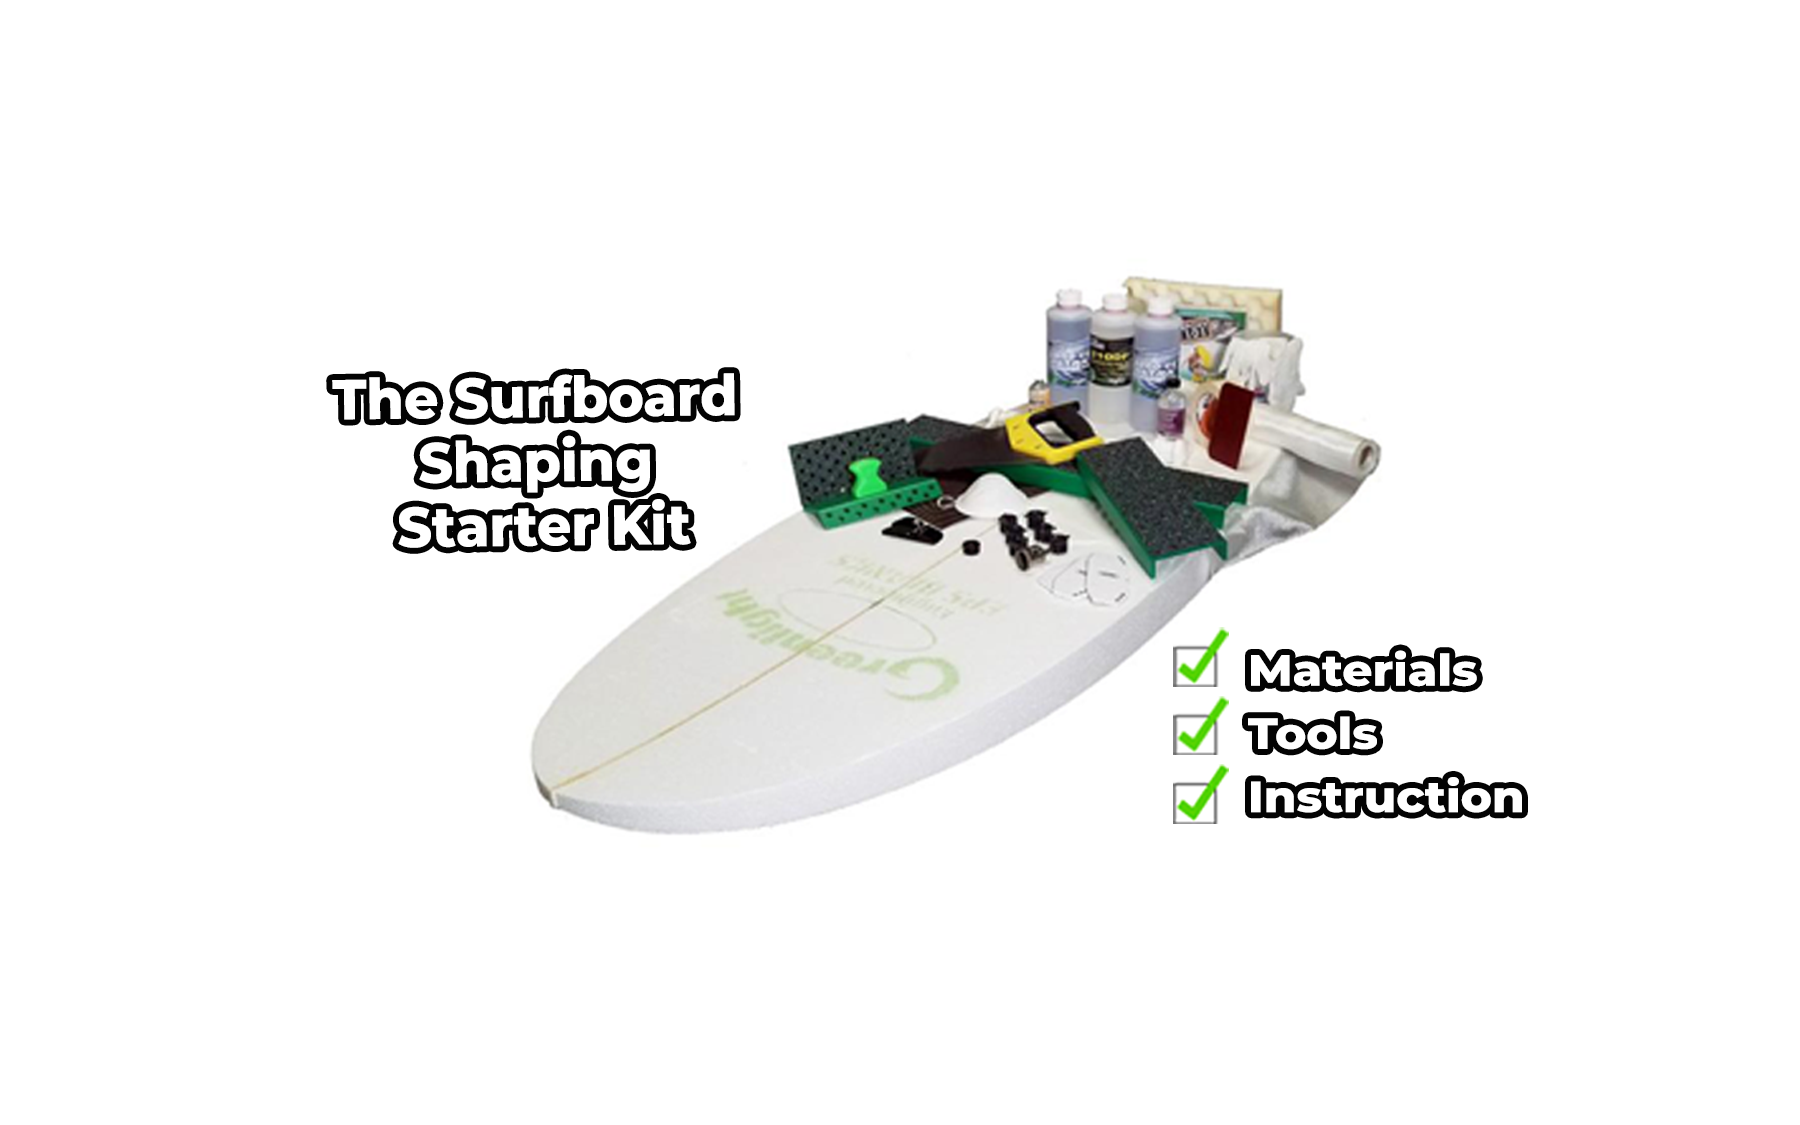 Epoxy Surfboard / SUP Ding Repair Kit — Greenlight Surf Co.